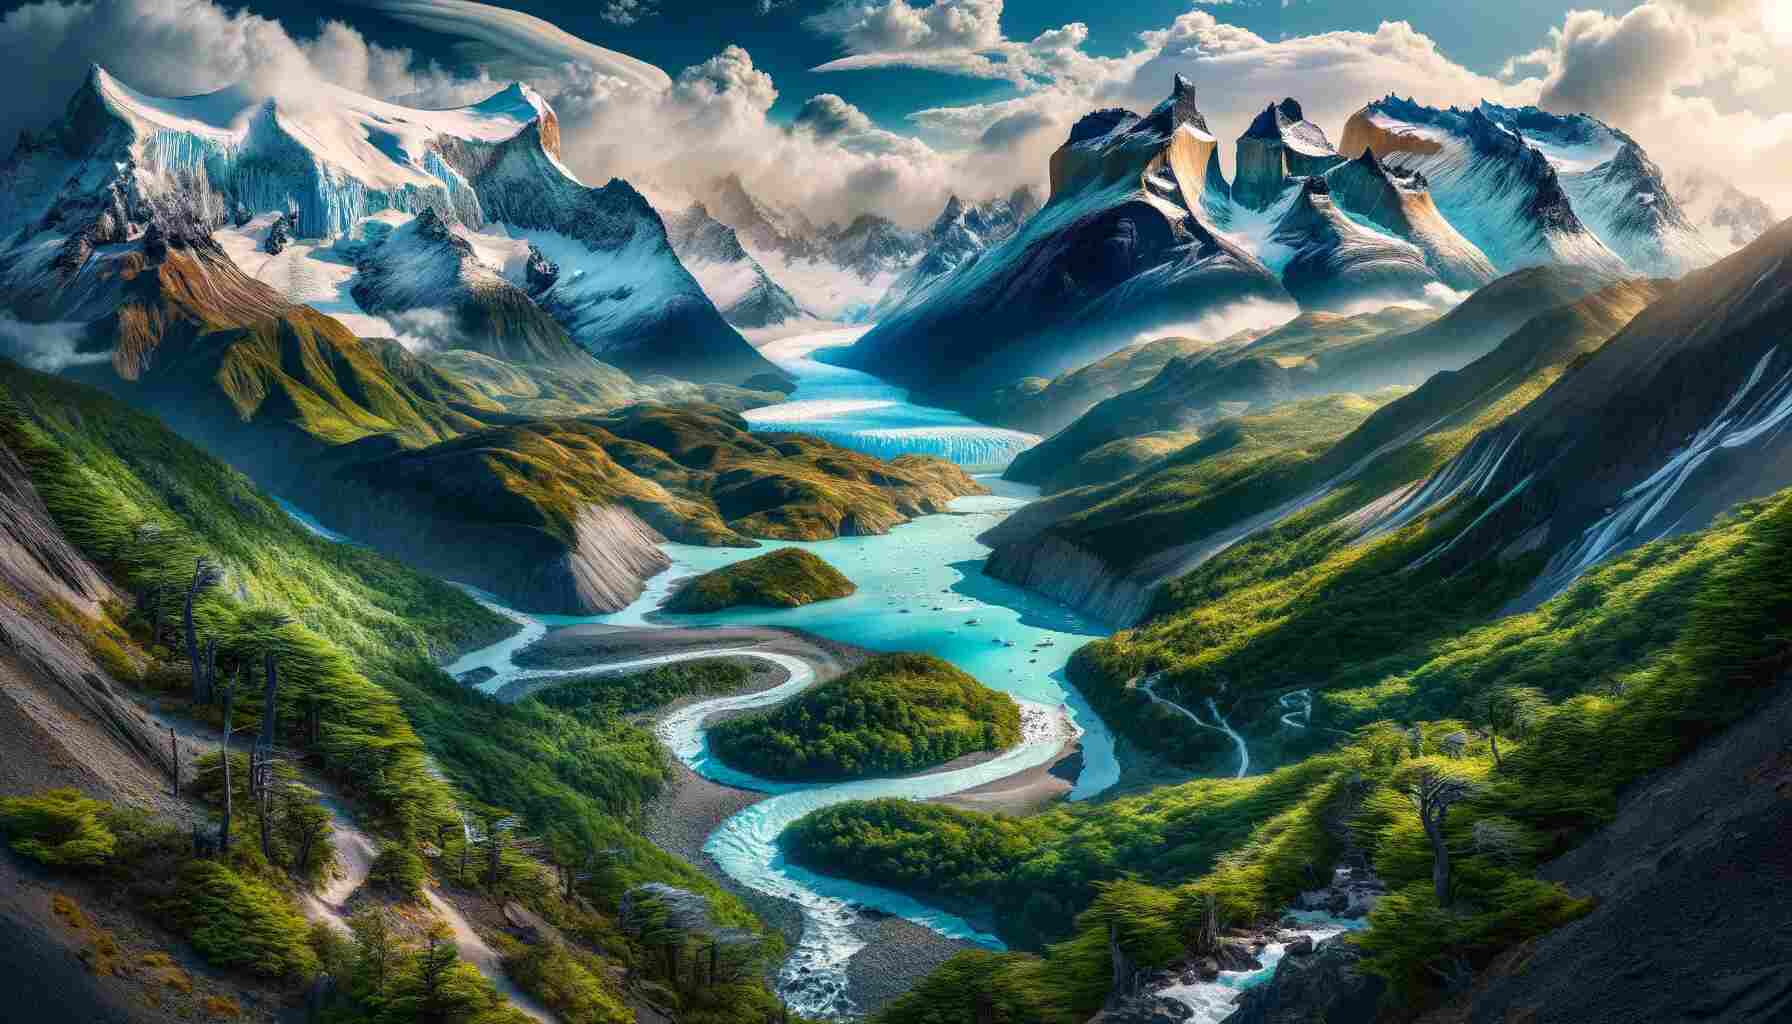 Here is an image depicting the W Trek in Torres del Paine National Park, Chile. It captures the varied landscapes of glaciers, rivers, and lush forests, embodying the essence of this iconic hike.